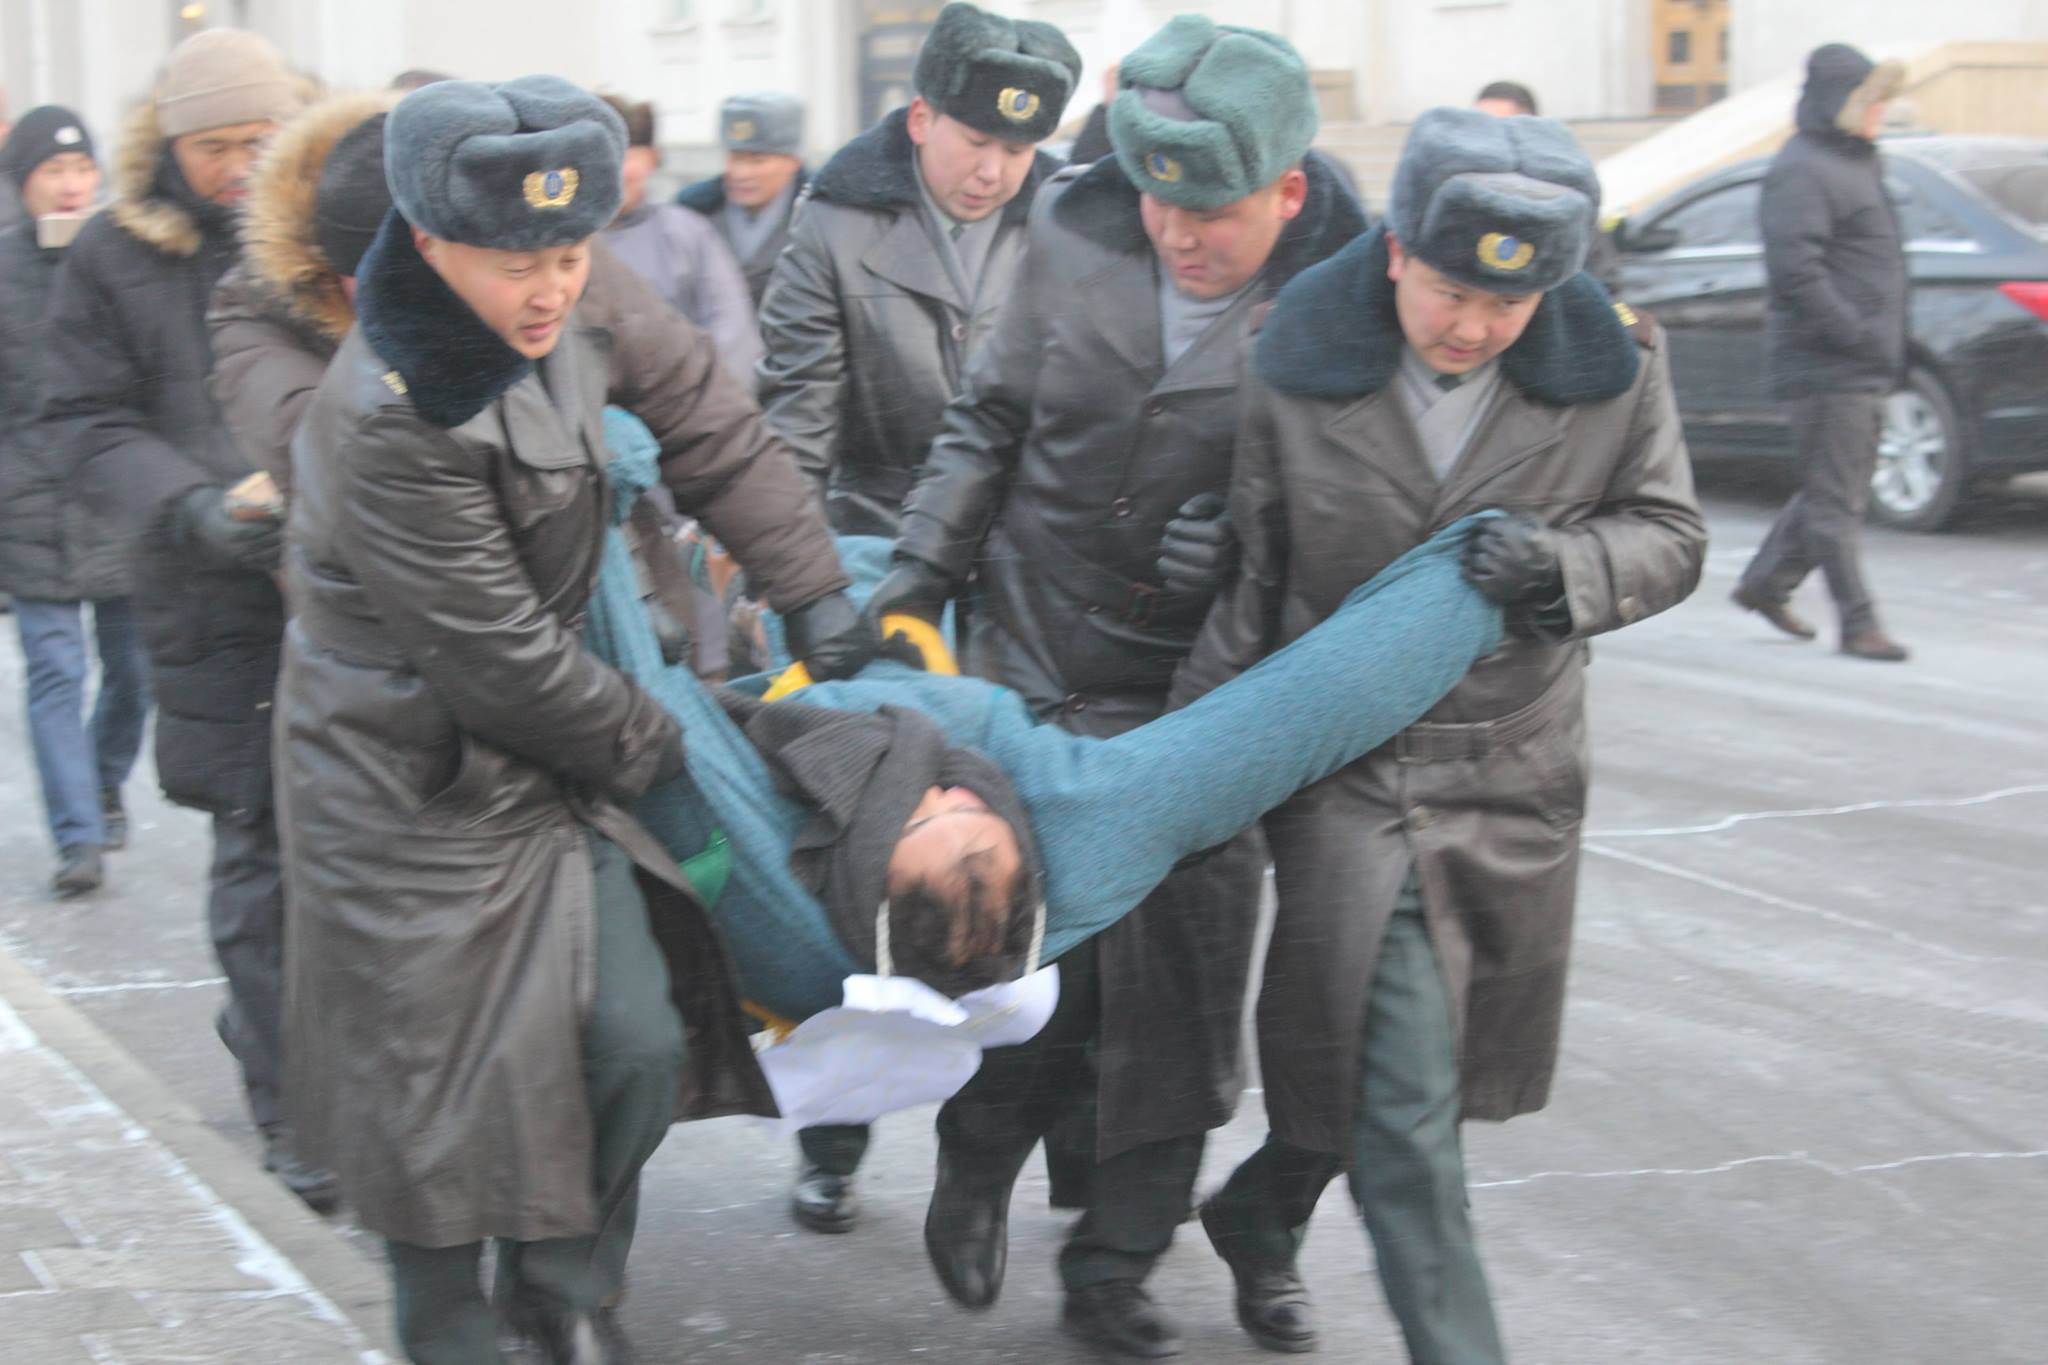 Mongolian police detain protester during a sit-in, March 2016